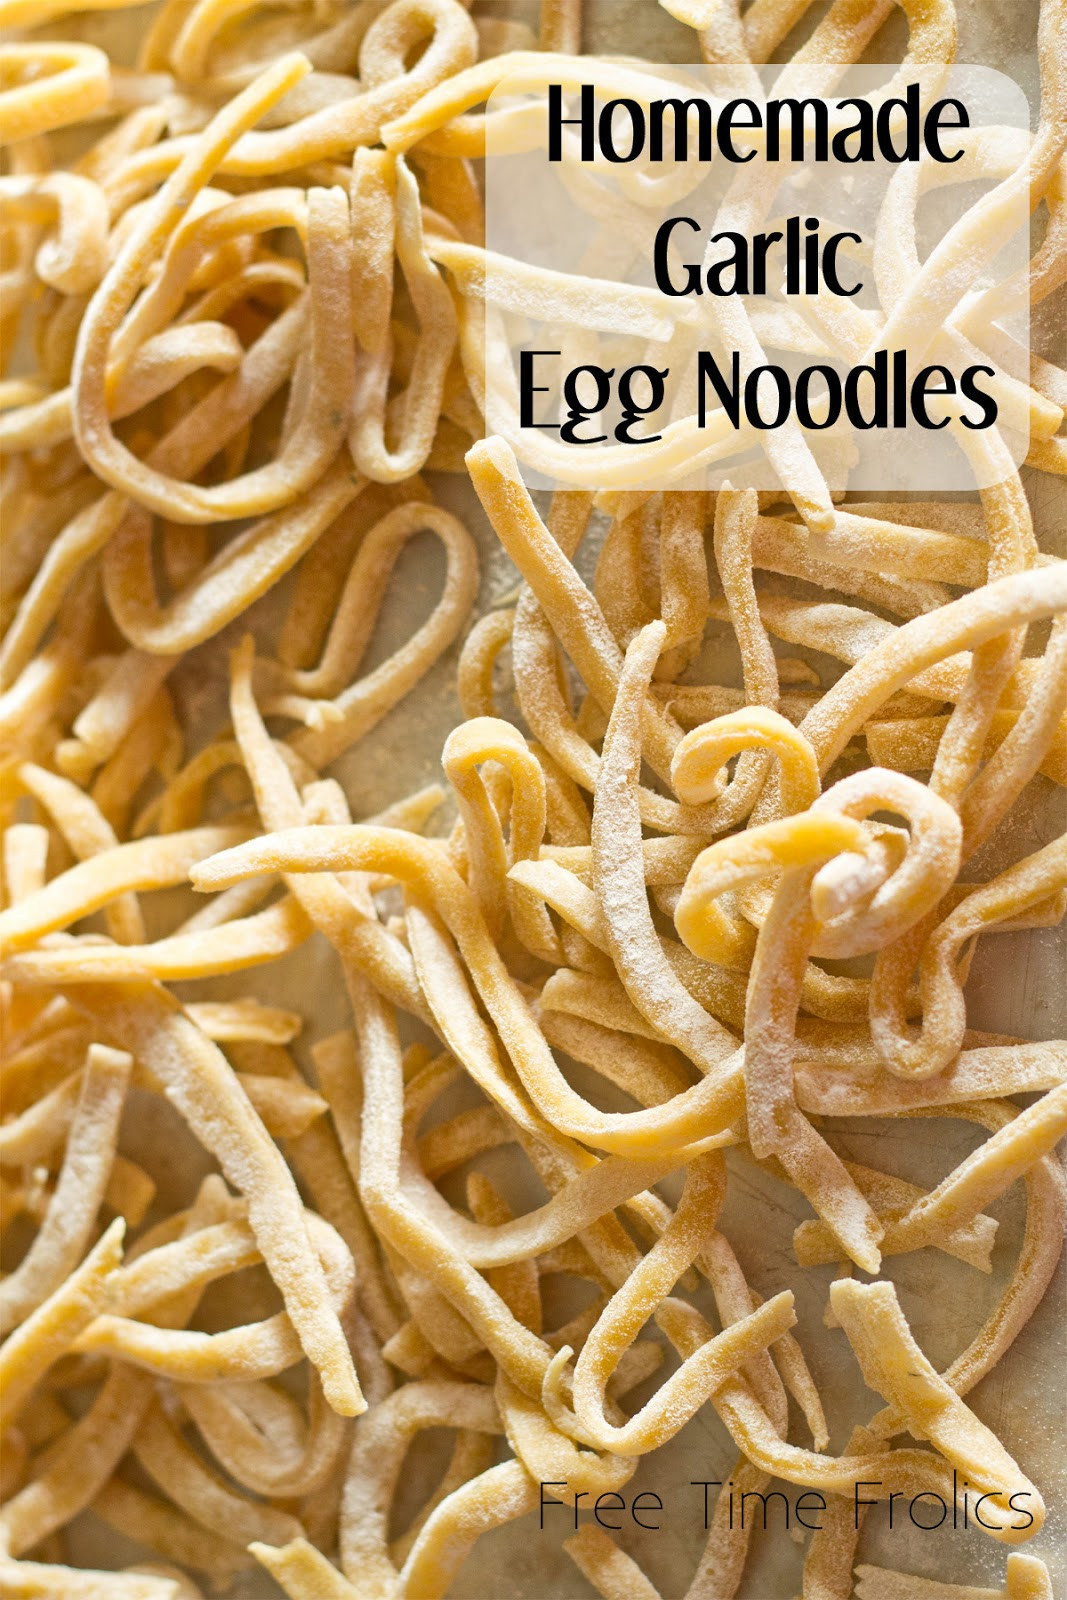 Homemade Noodles From Scratch
 Homemade Garlic Egg Noodles Recipe Free Time Frolics